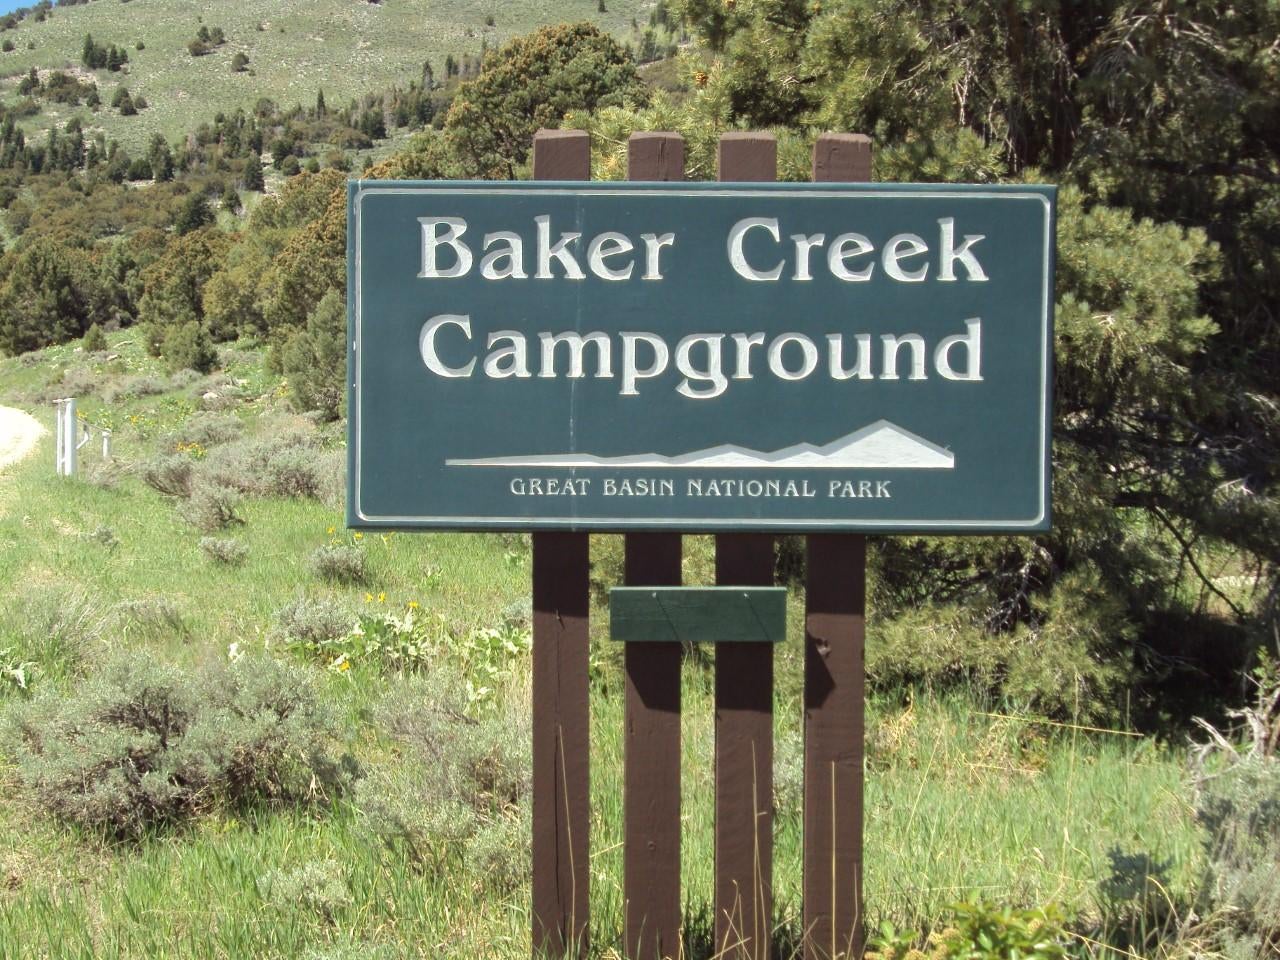 Camper submitted image from Baker Creek Campground — Great Basin National Park - 1